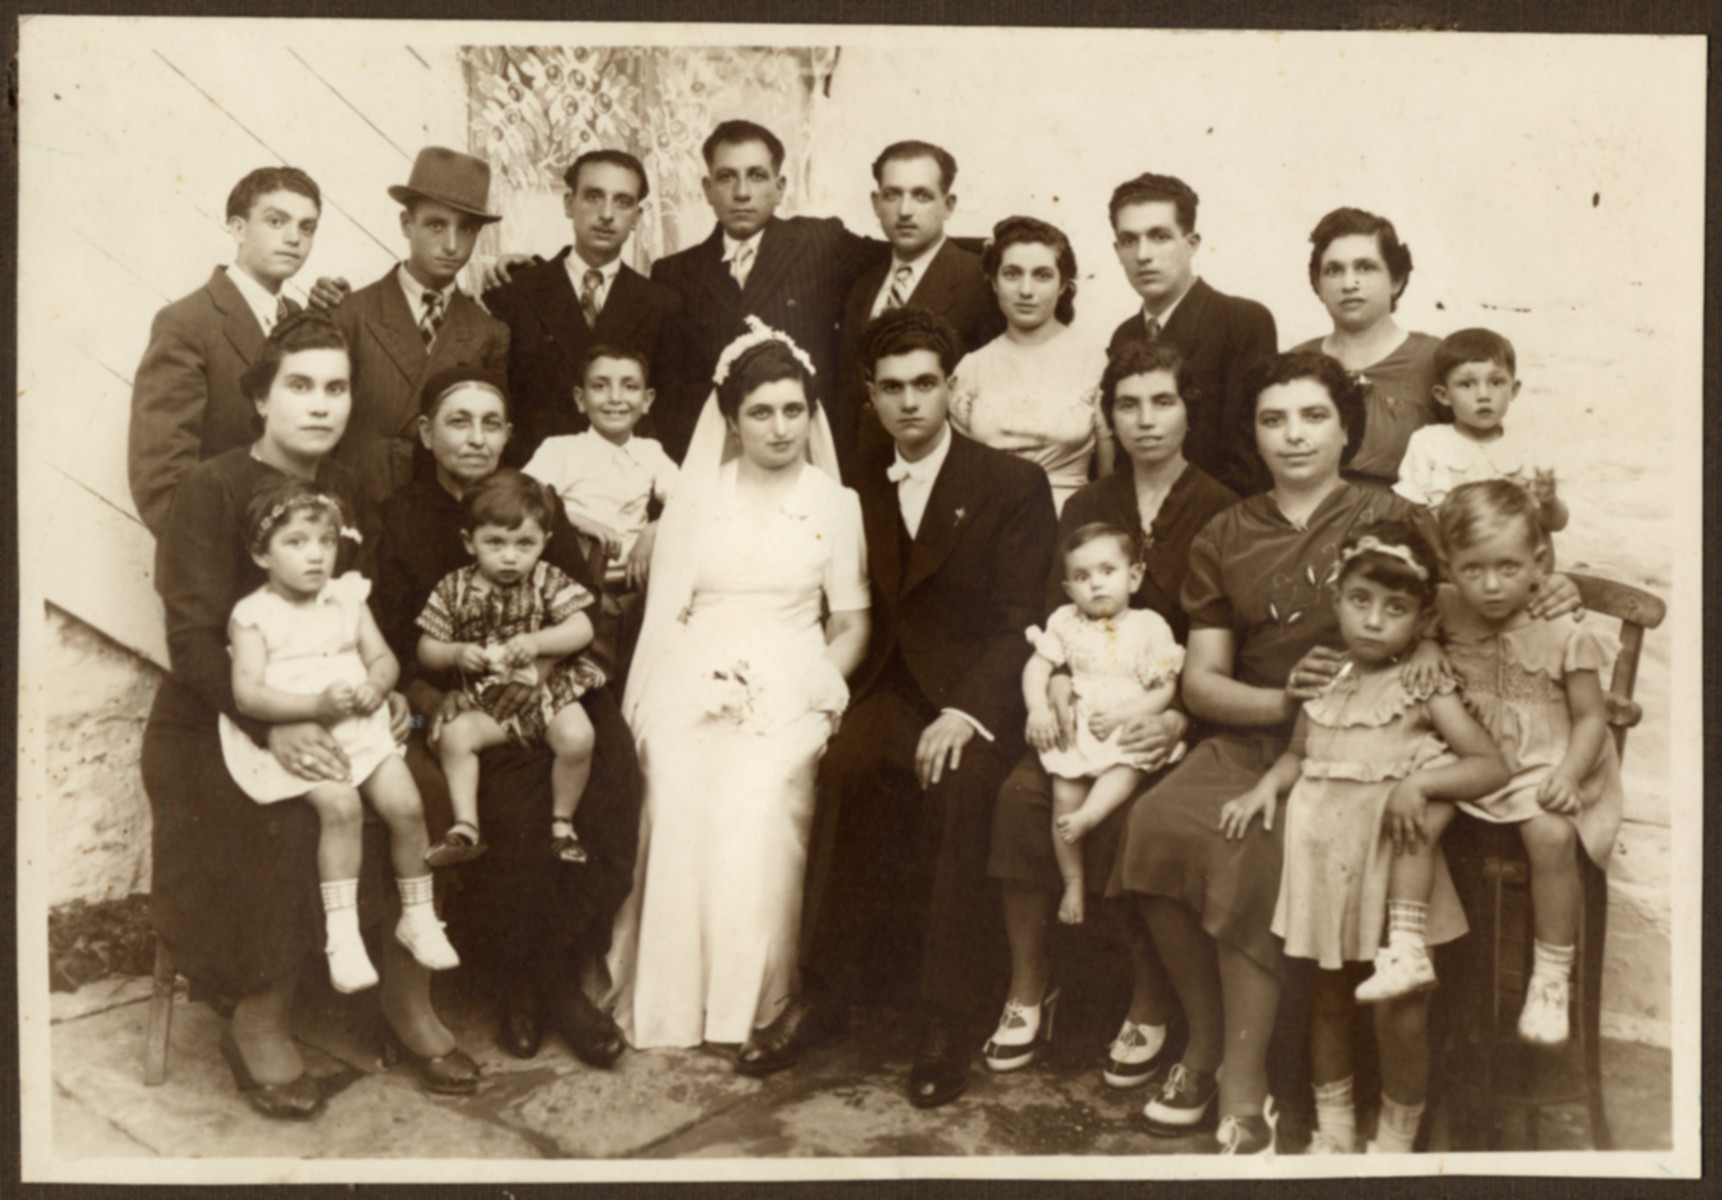 Wedding portrait of an extended Jewish family in Greece.

Pictured is the Vitalis family.  Everyone perished except for Rosa Vitalli Ackou and her five children.